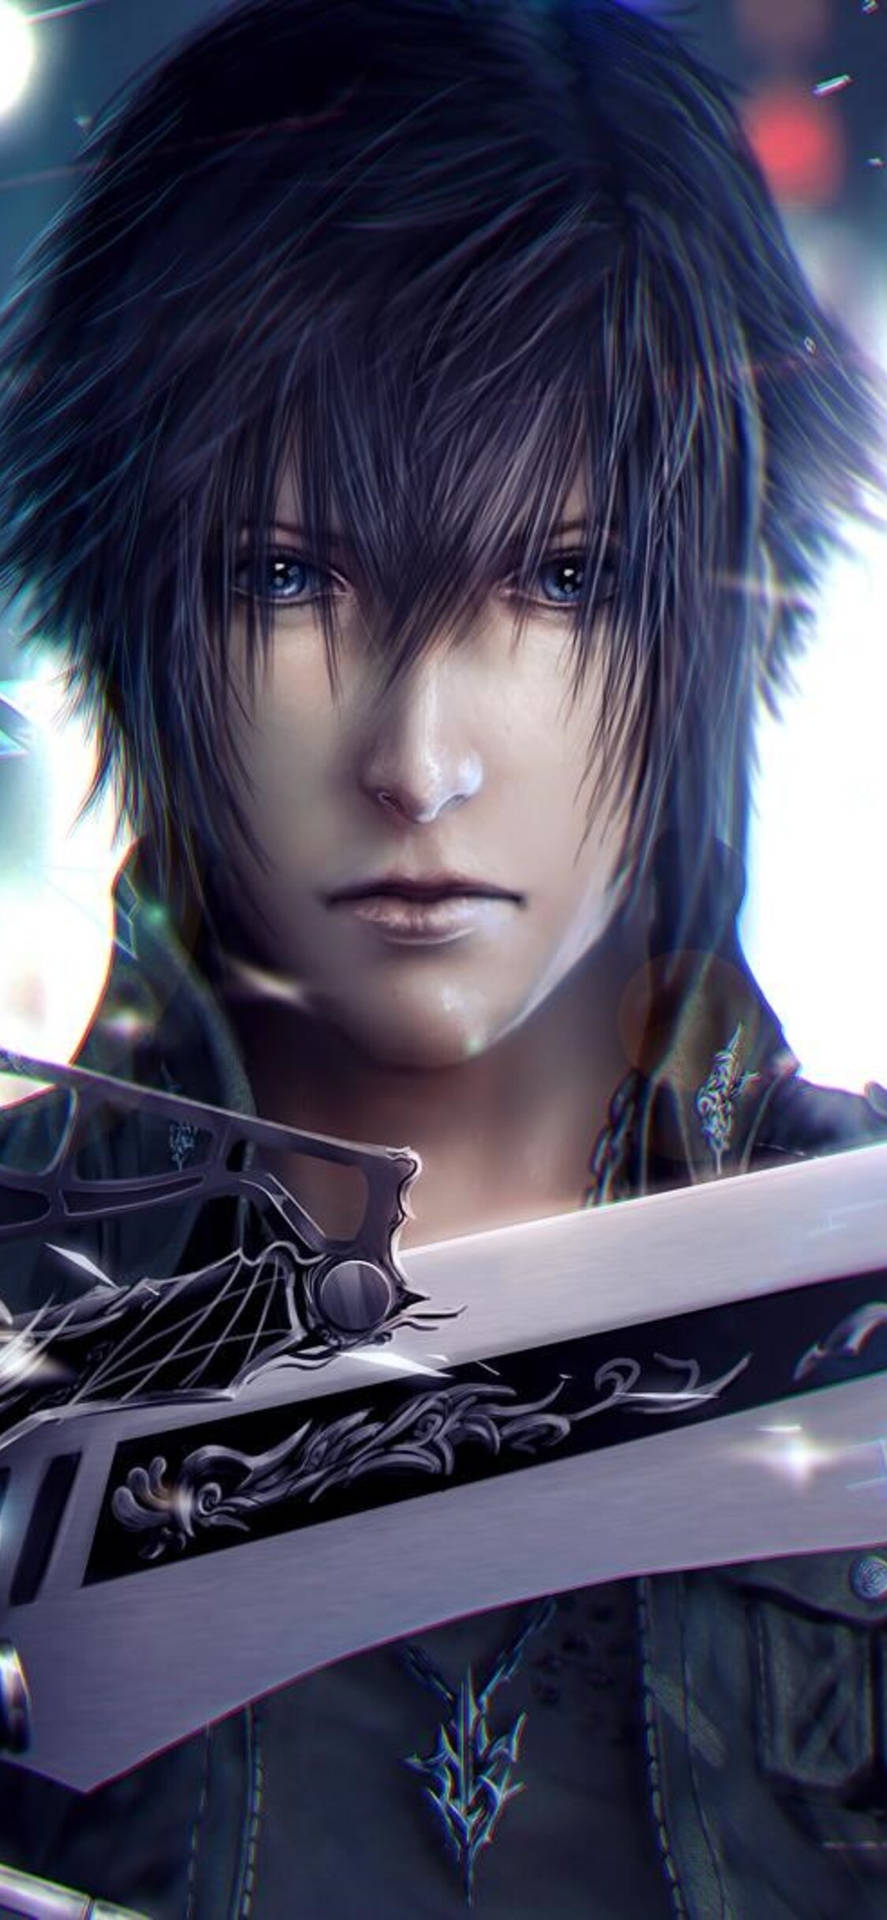 Get ready for incredible Final Fantasy adventures on your Iphone! Wallpaper